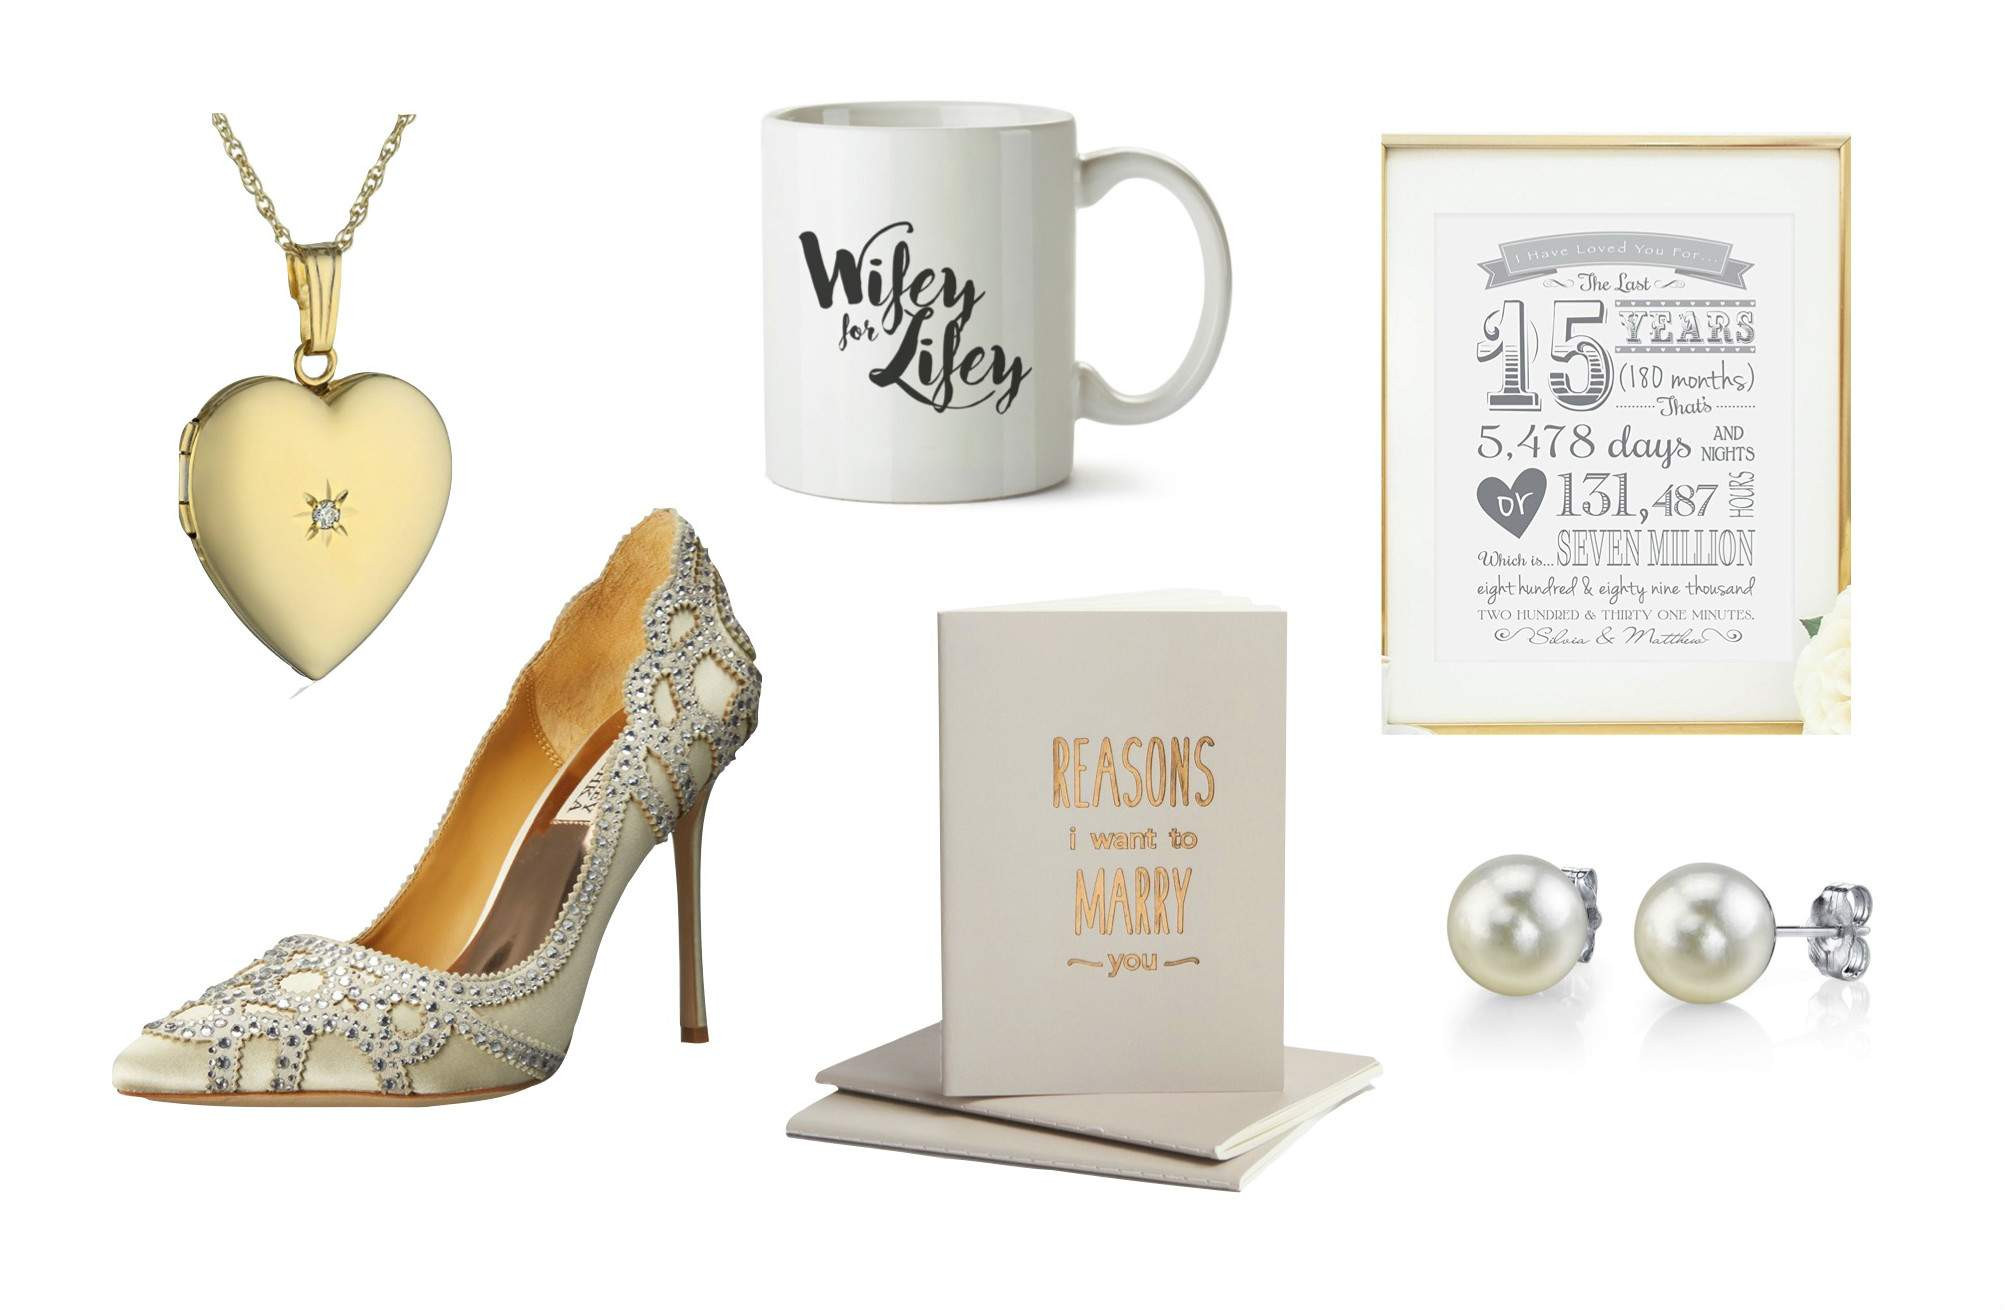 Gift Ideas For Bride On Wedding Day From Groom
 Best Wedding Day Gift Ideas From the Groom to the Bride